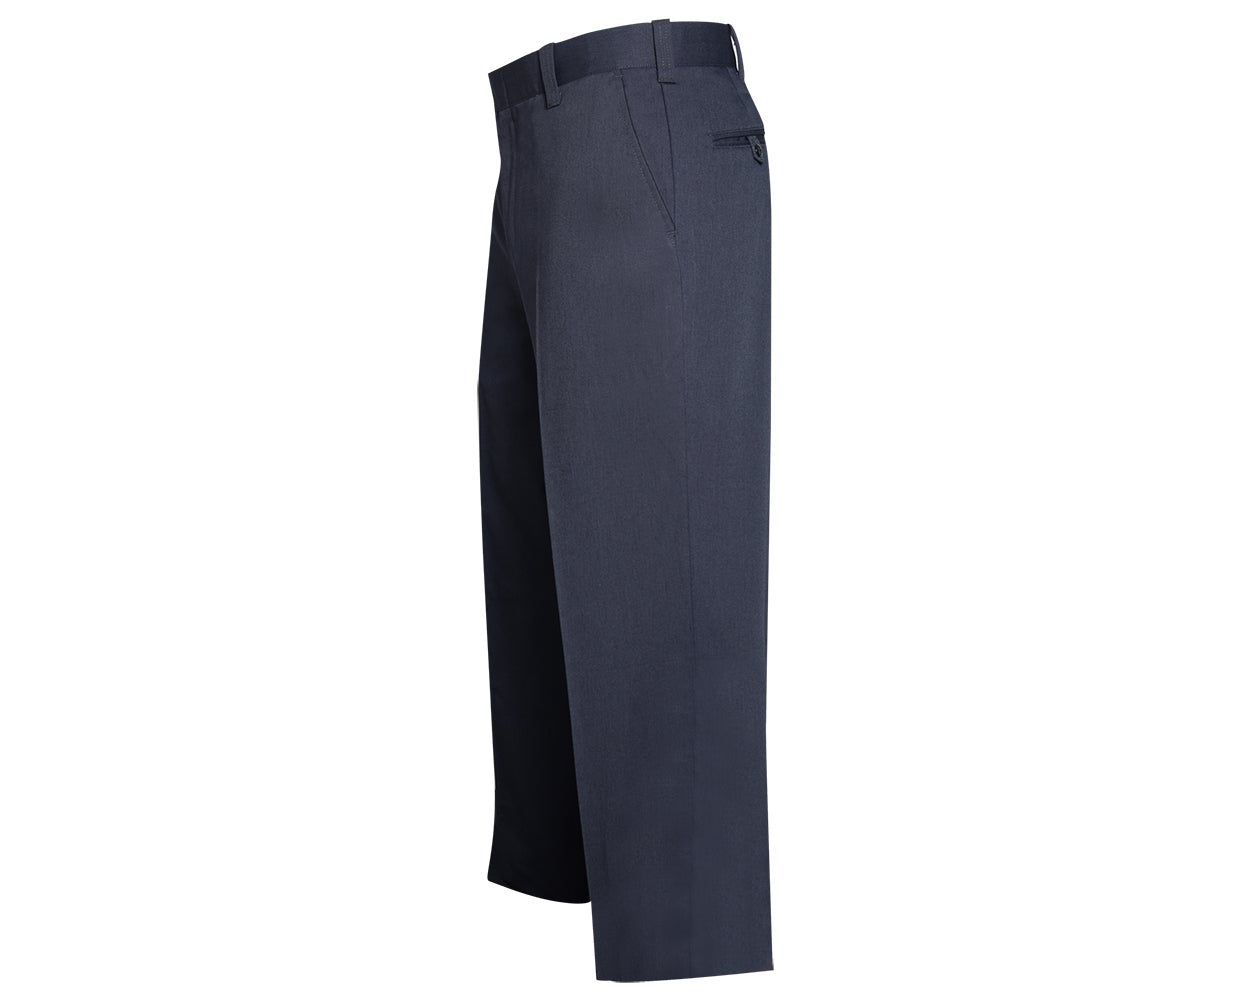 Flying Cross RESPONSE WEAR 65% POLY/35% COTTON WOMENS PANTS